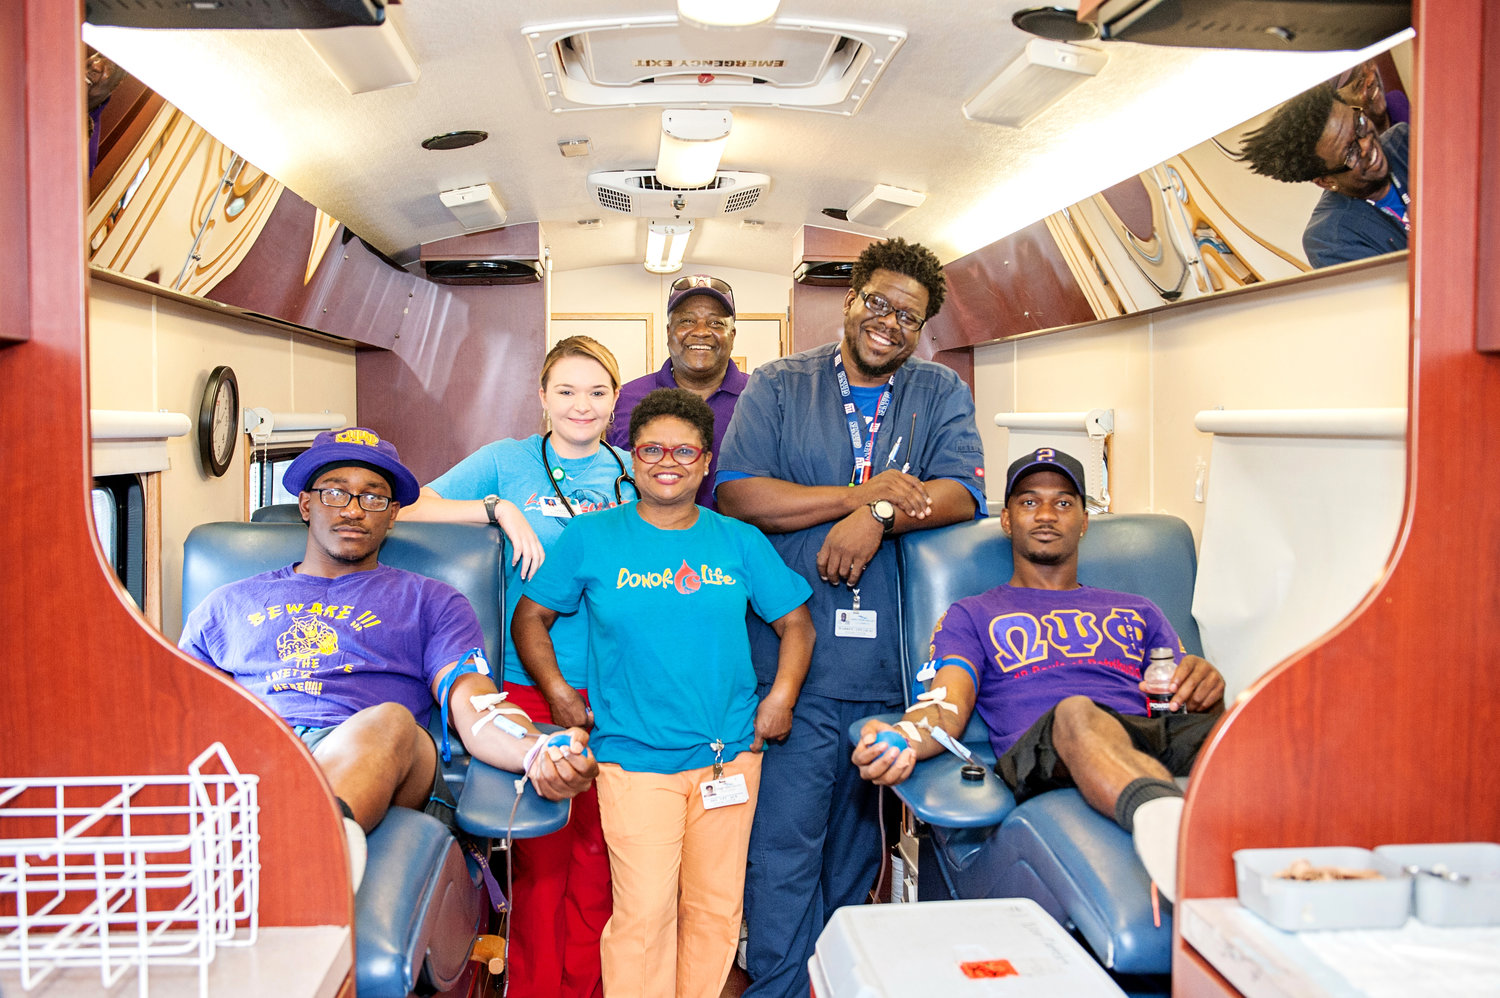 A convenient way to give blood is at Bloodmobiles and local blood drives at locations including schools, shopping centers and businesses.